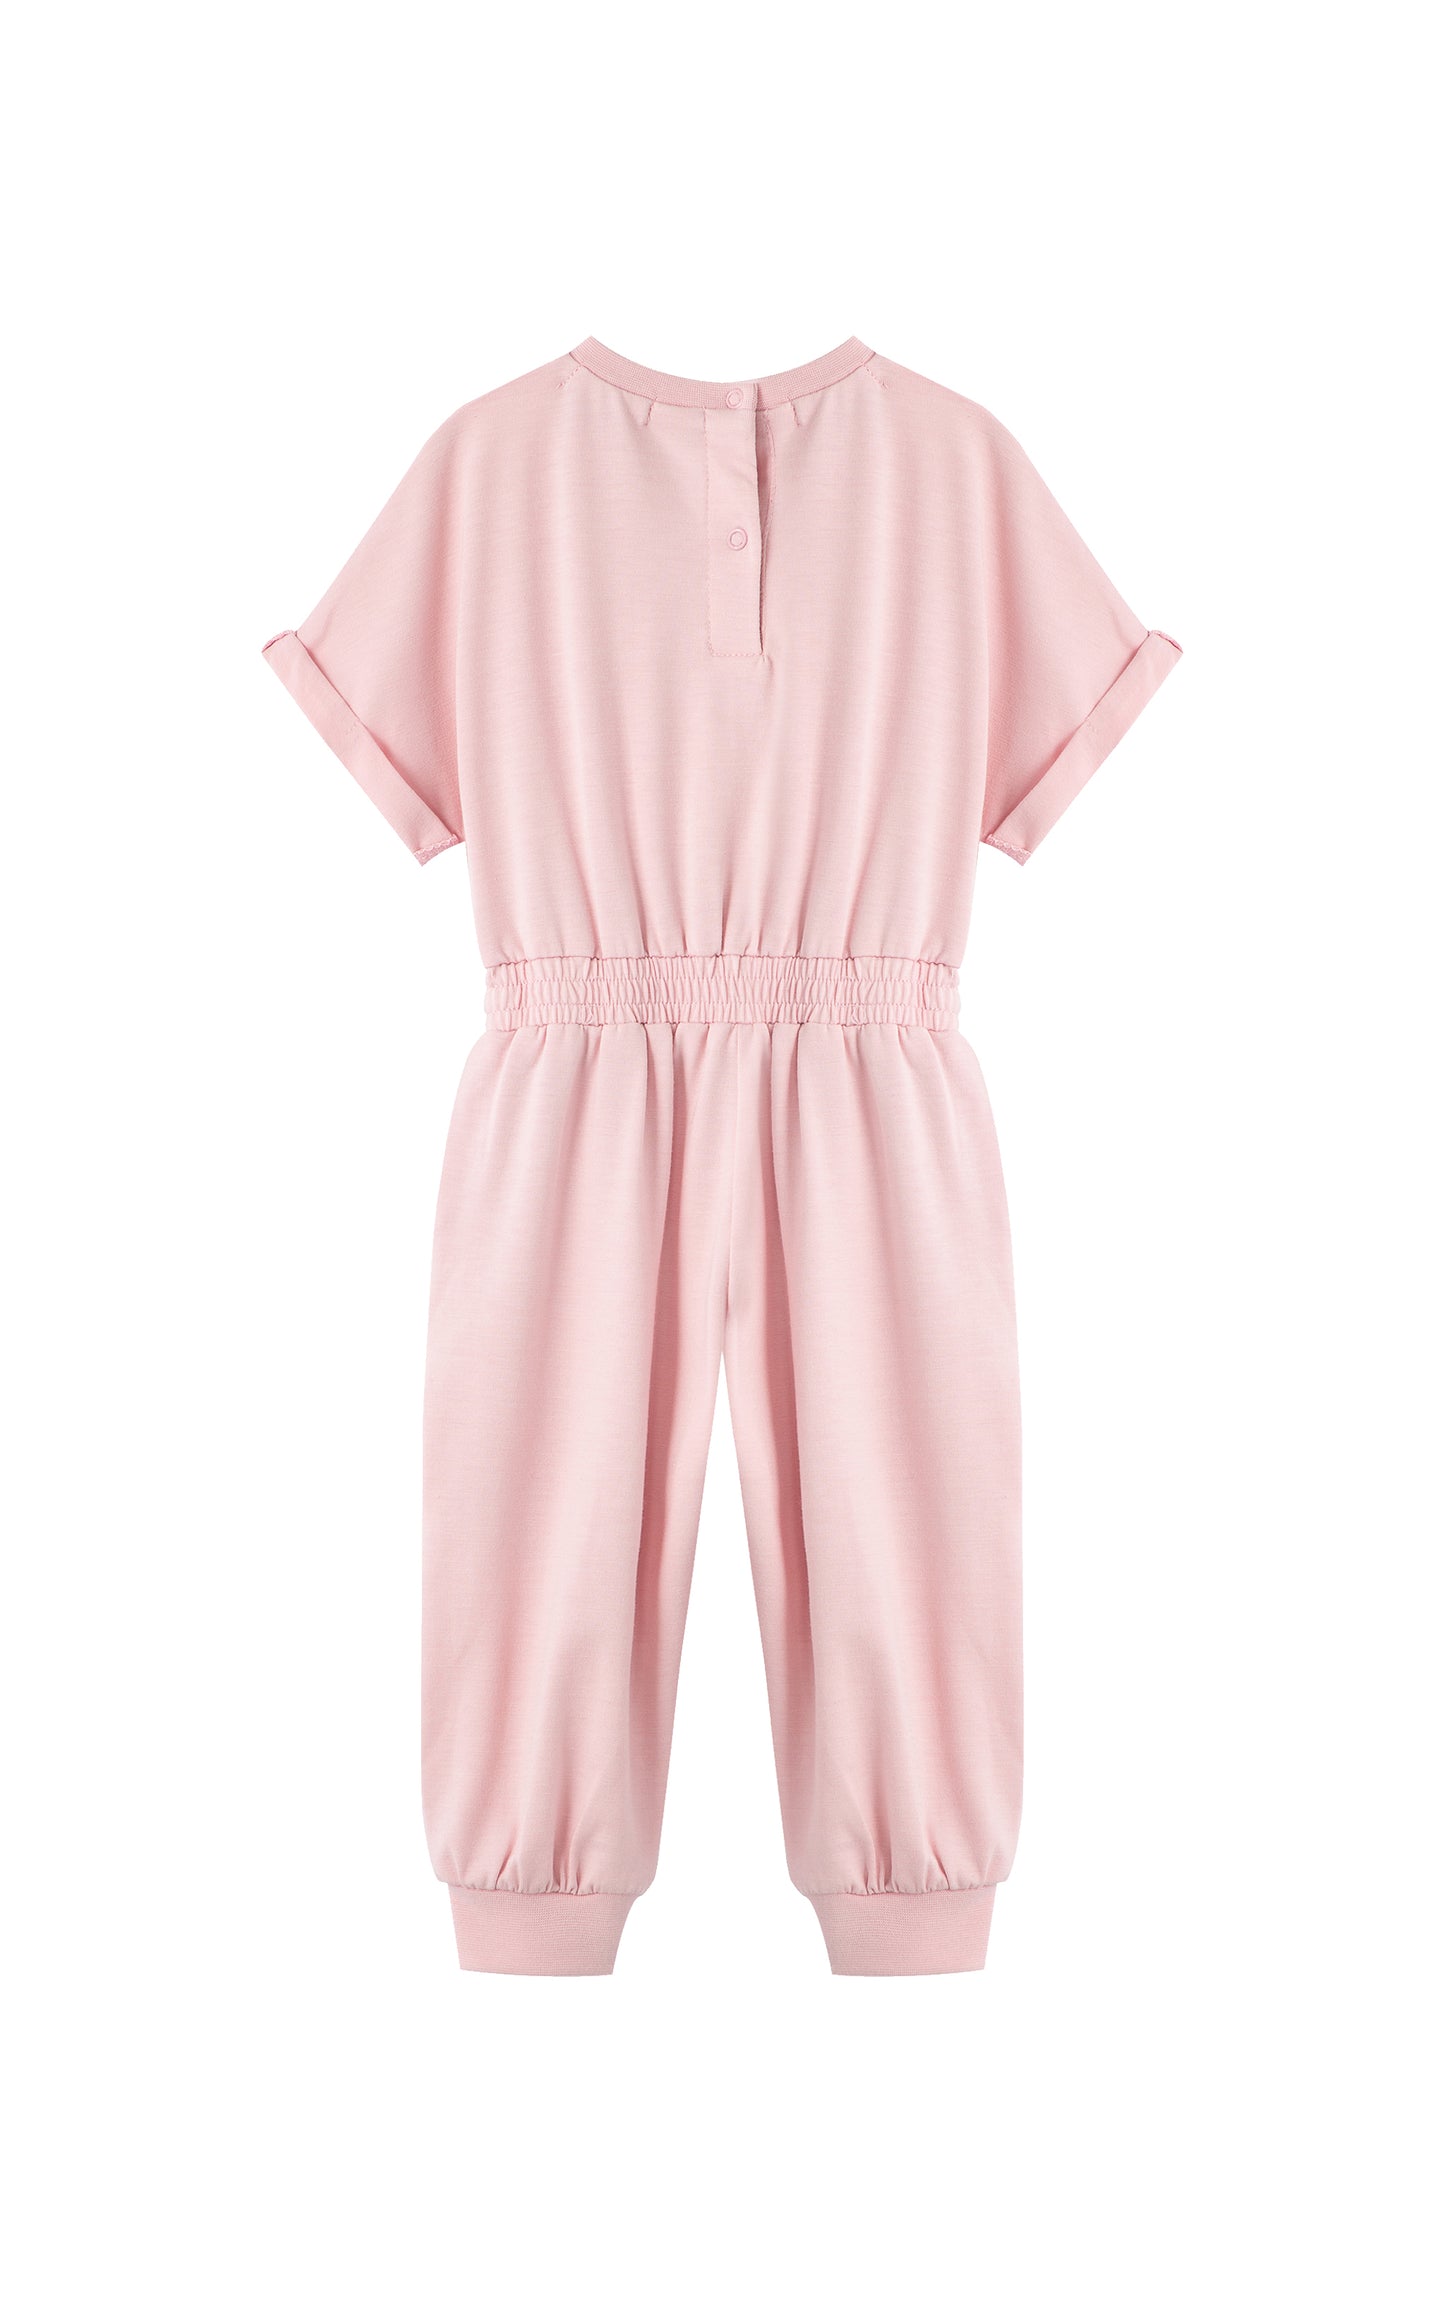 Back view of pink romper with folded cuff sleeves.